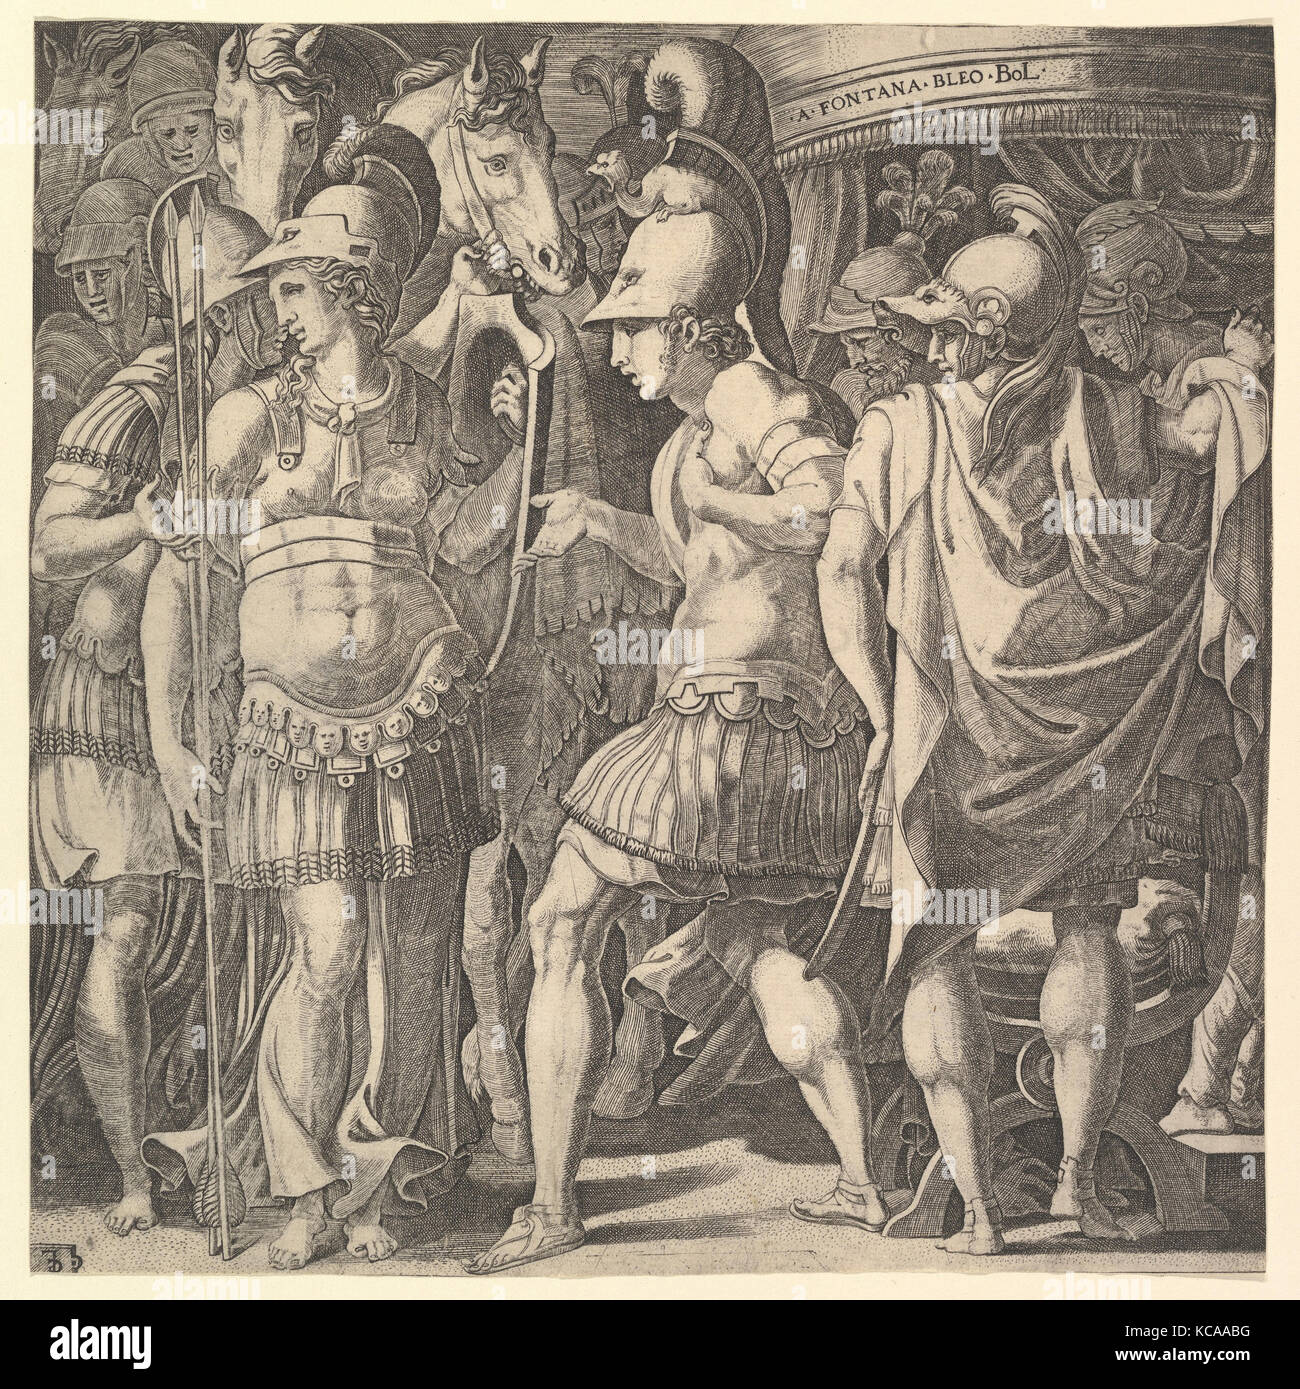 Alexander welcoming Thalestris and the Amazons, Master FG, mid-16th century Stock Photo